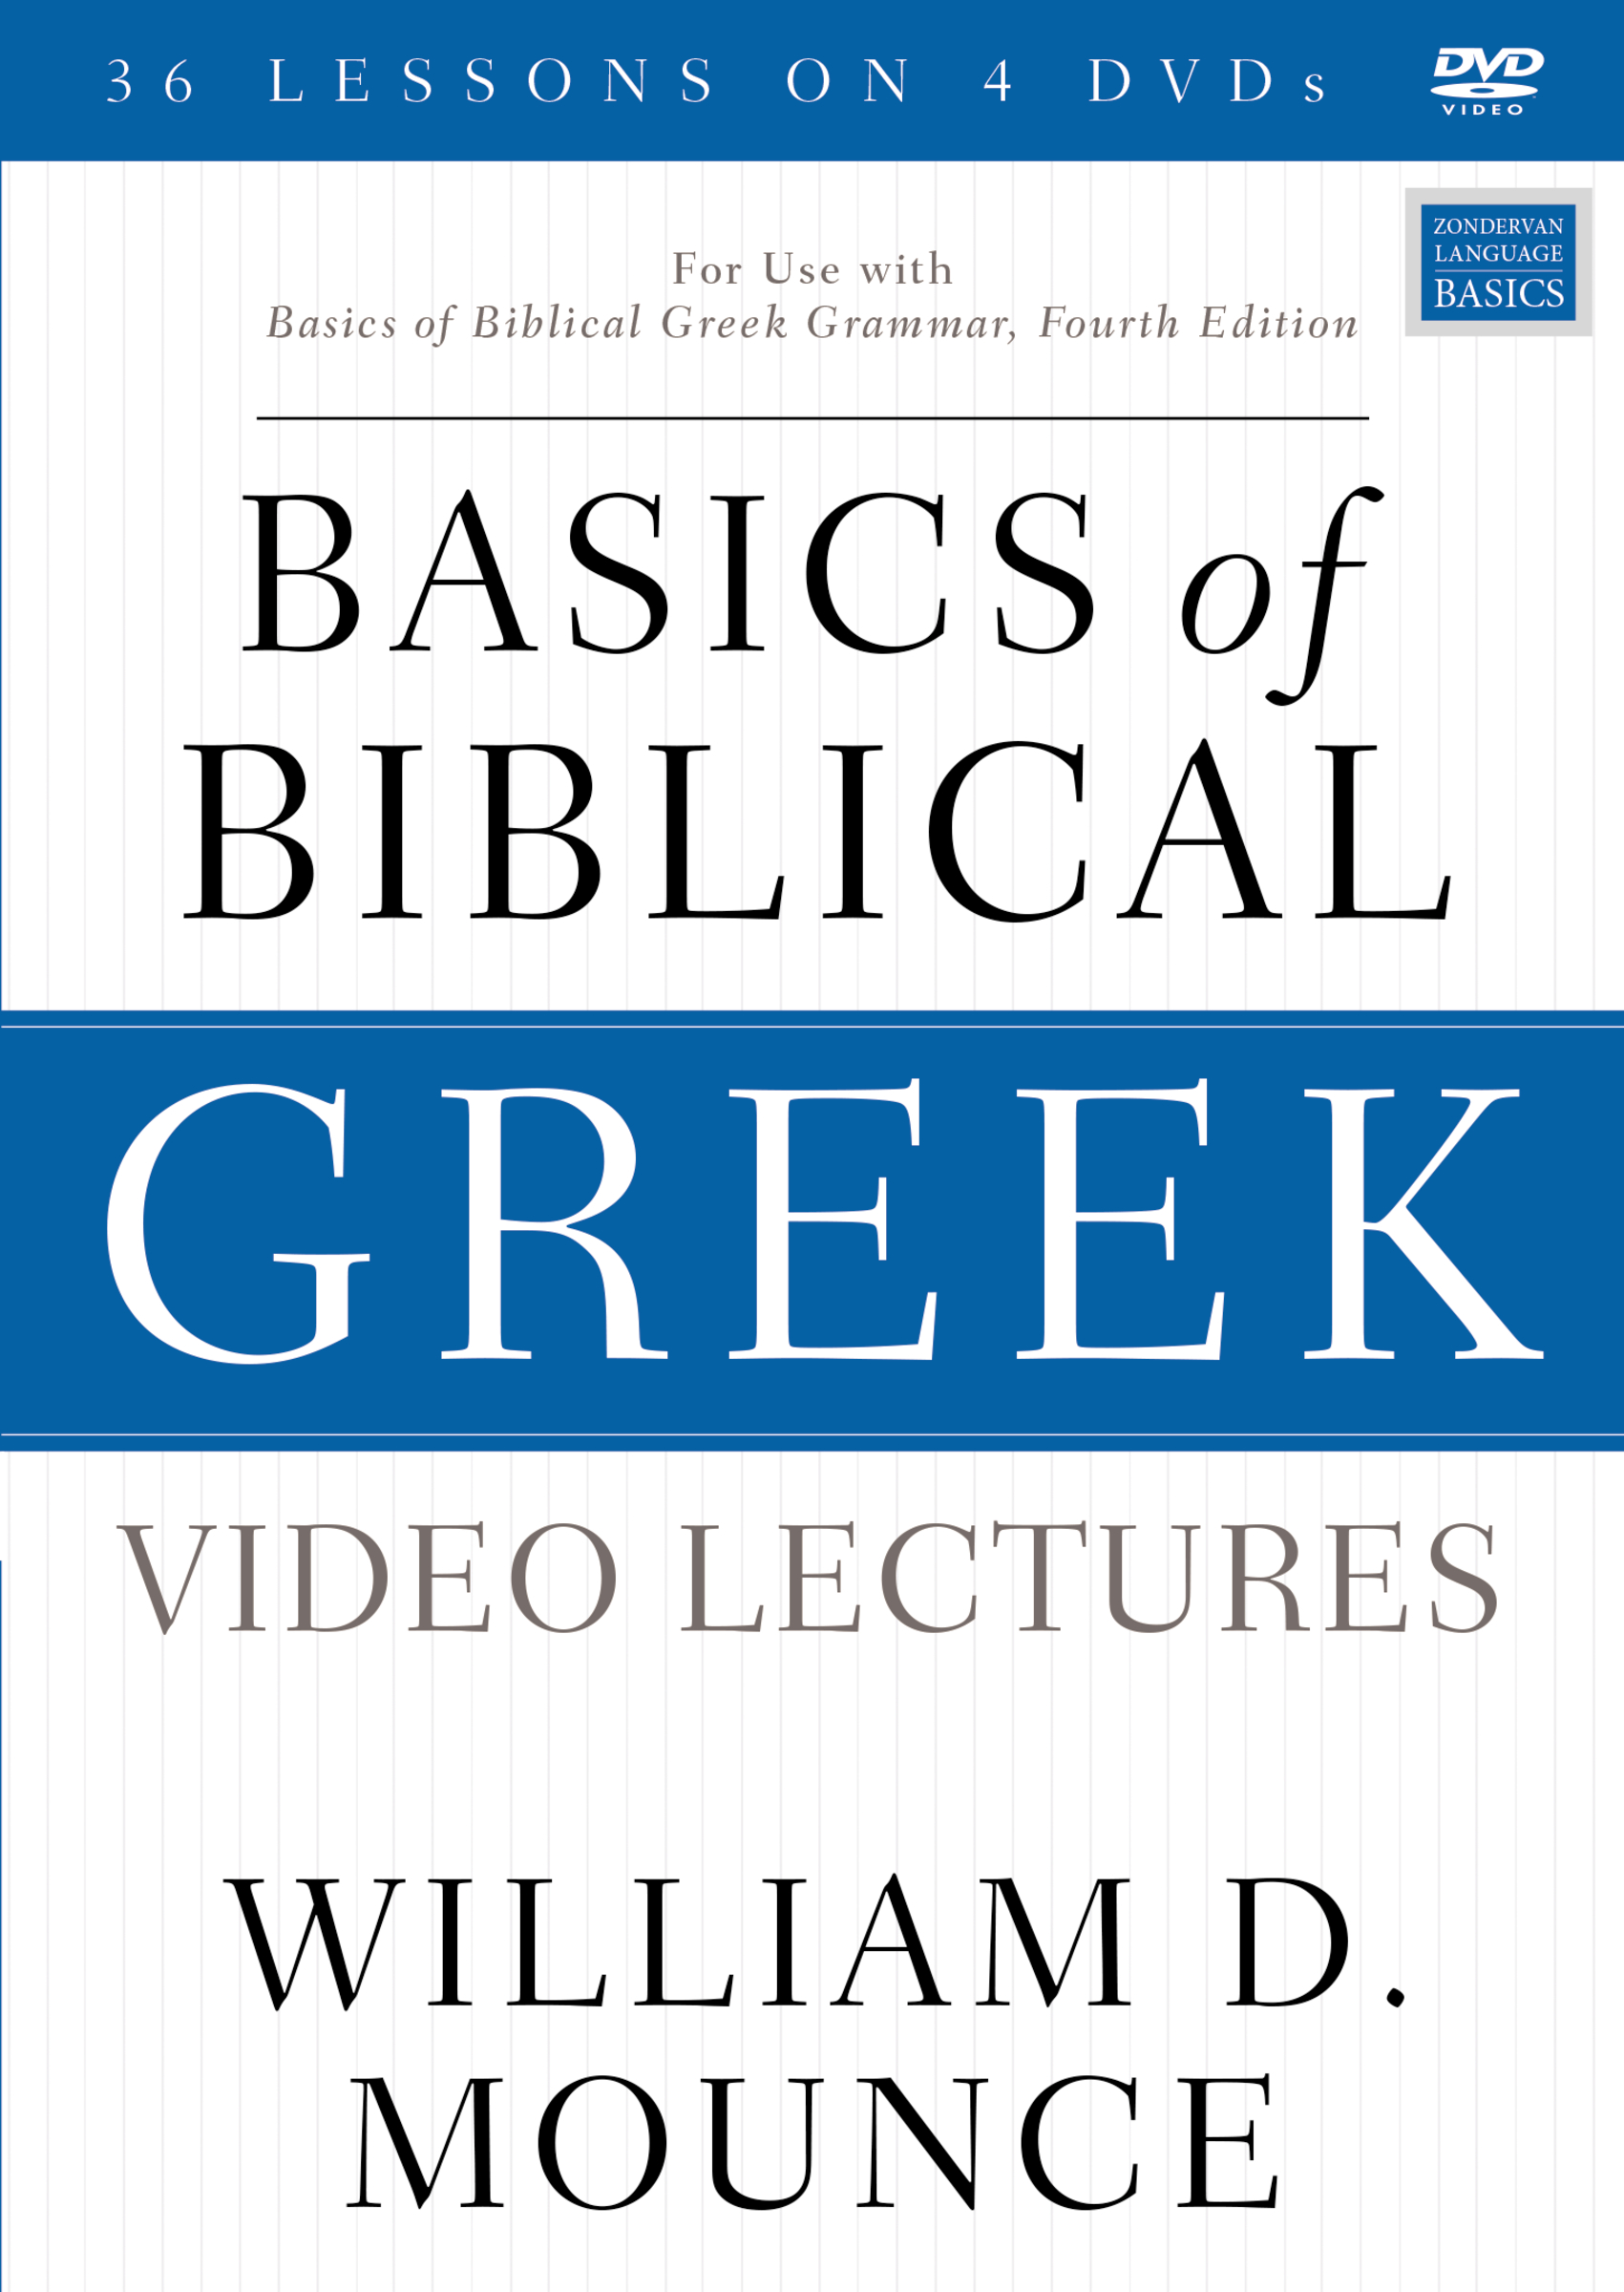 Basics of Biblical Greek Video Lectures